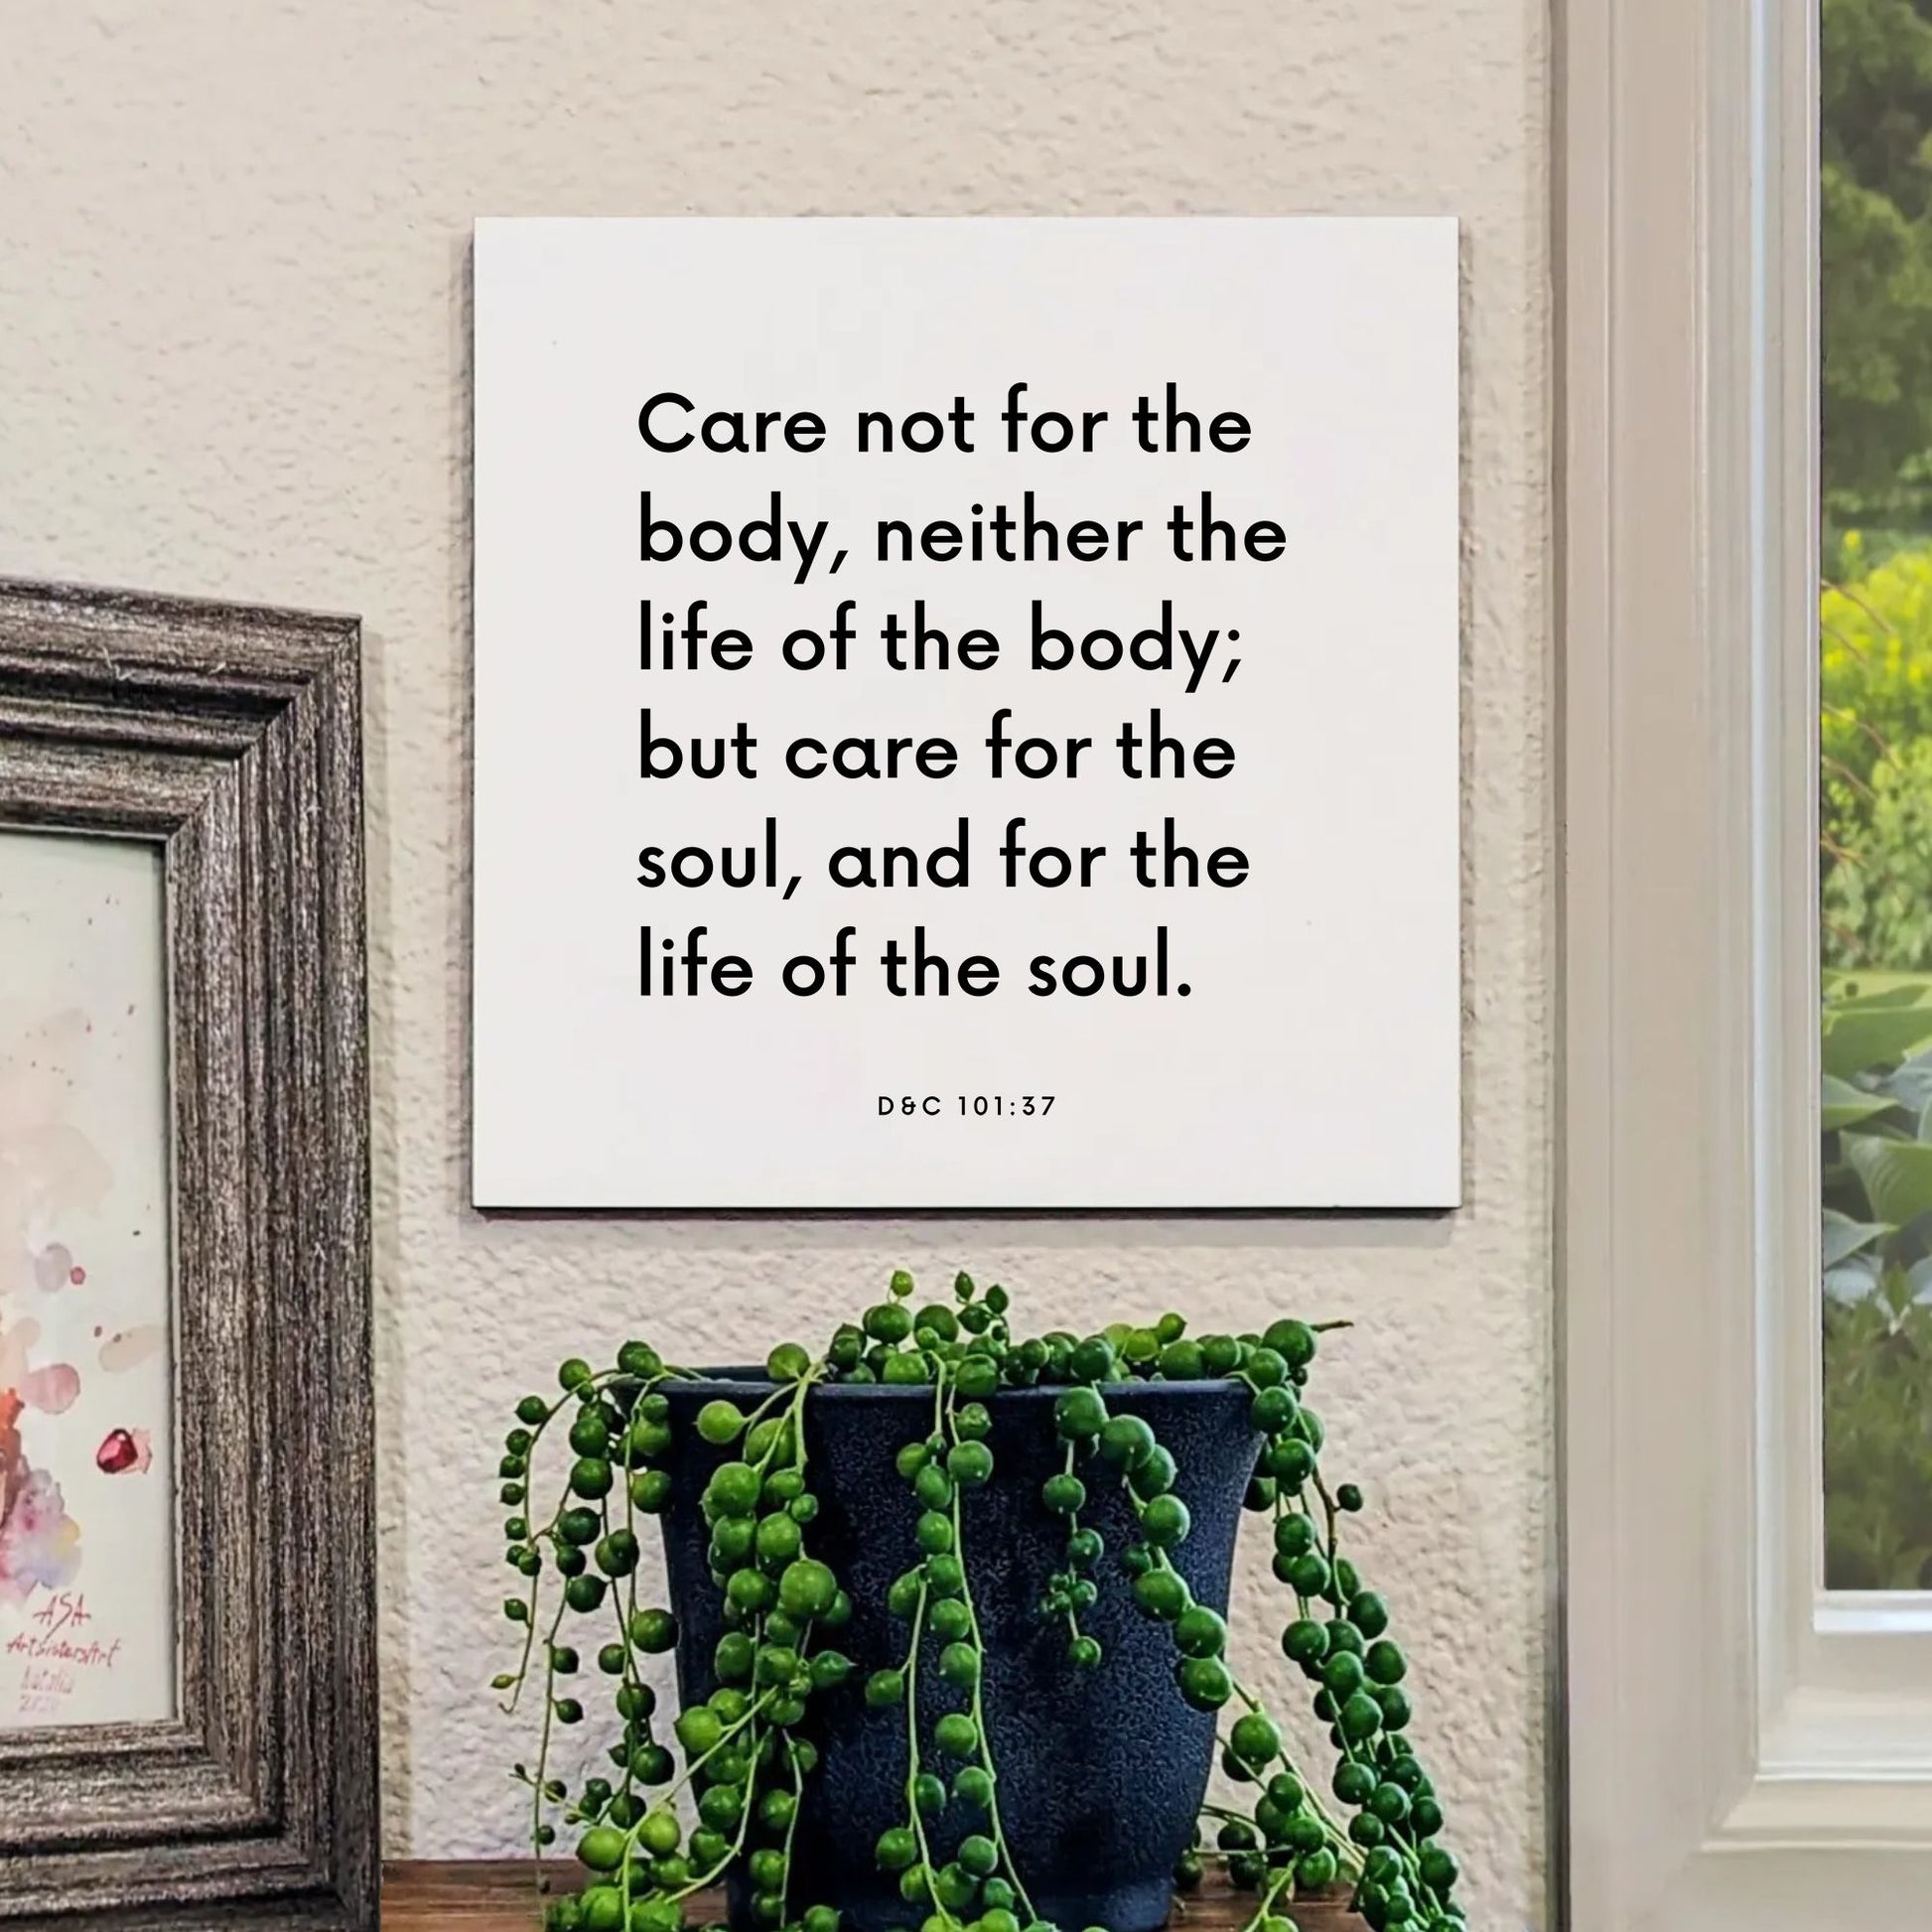 Window mouting of the scripture tile for D&C 101:37 - "Care not for the body, neither the life of the body"